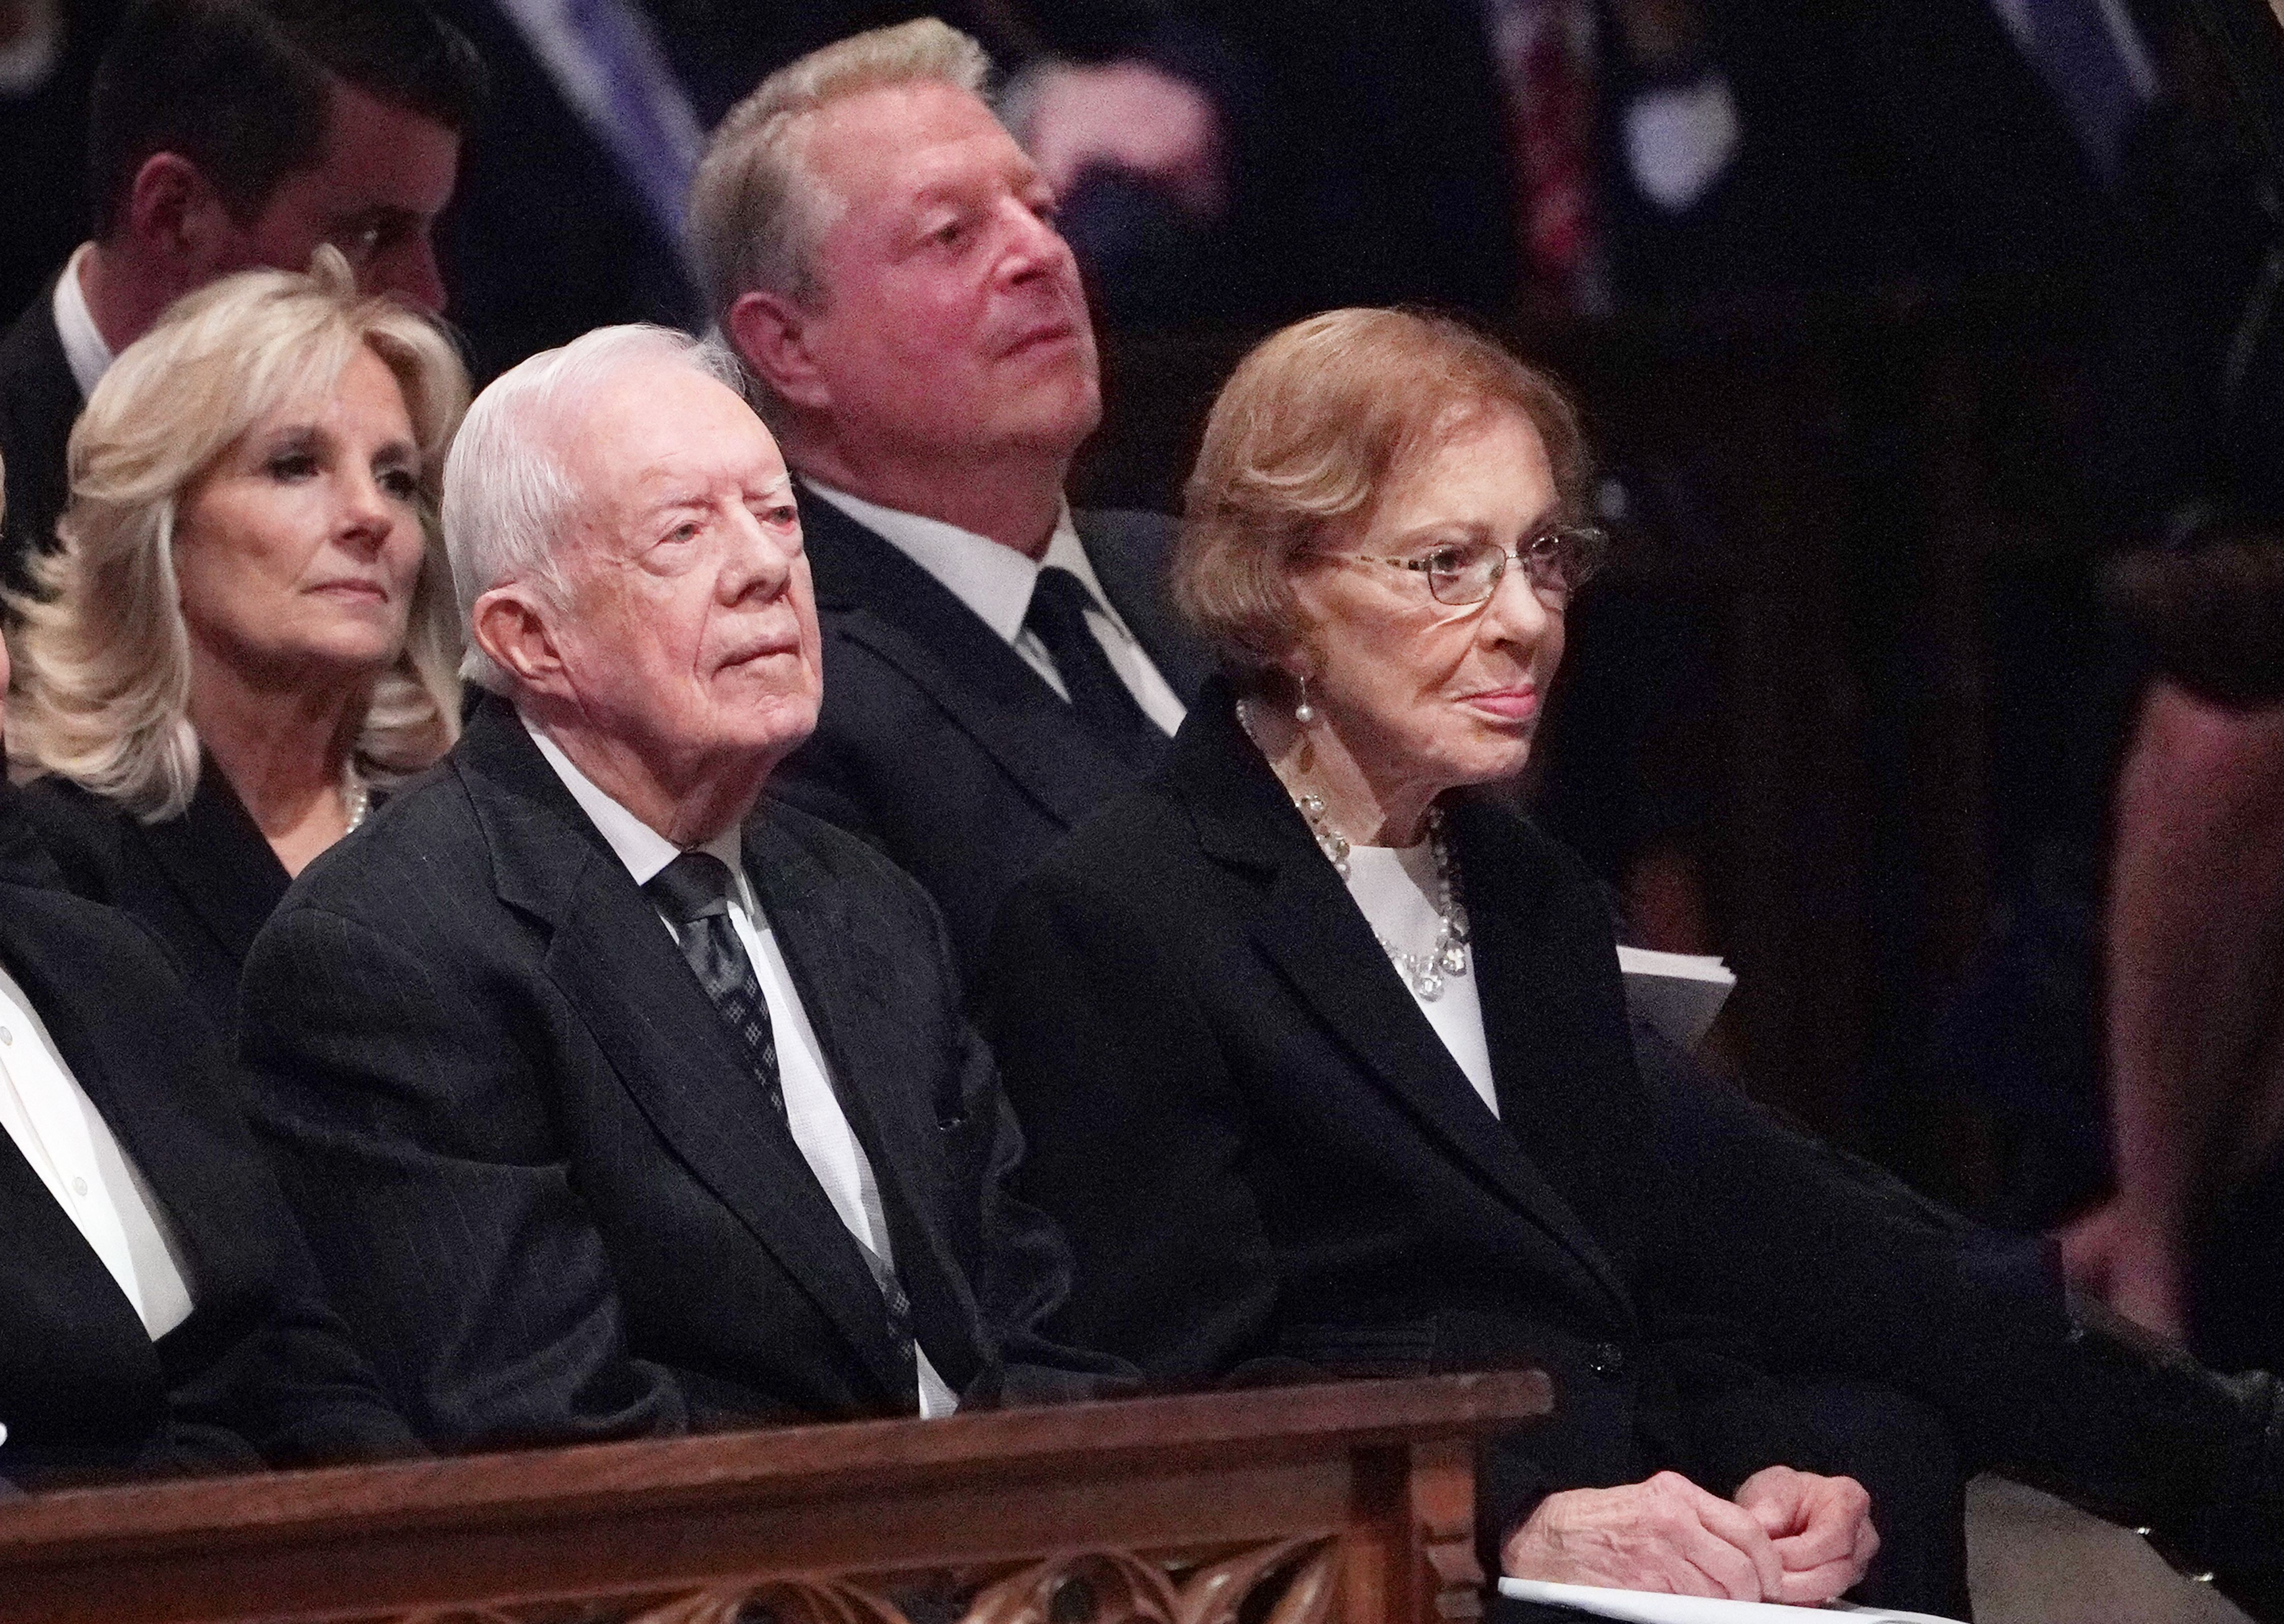 Jimmy and Rosalynn Carter, Jill Biden, and Al Gore at former US president George H. W. Bush's funeral in Washington, 2018. | Source: Getty Images